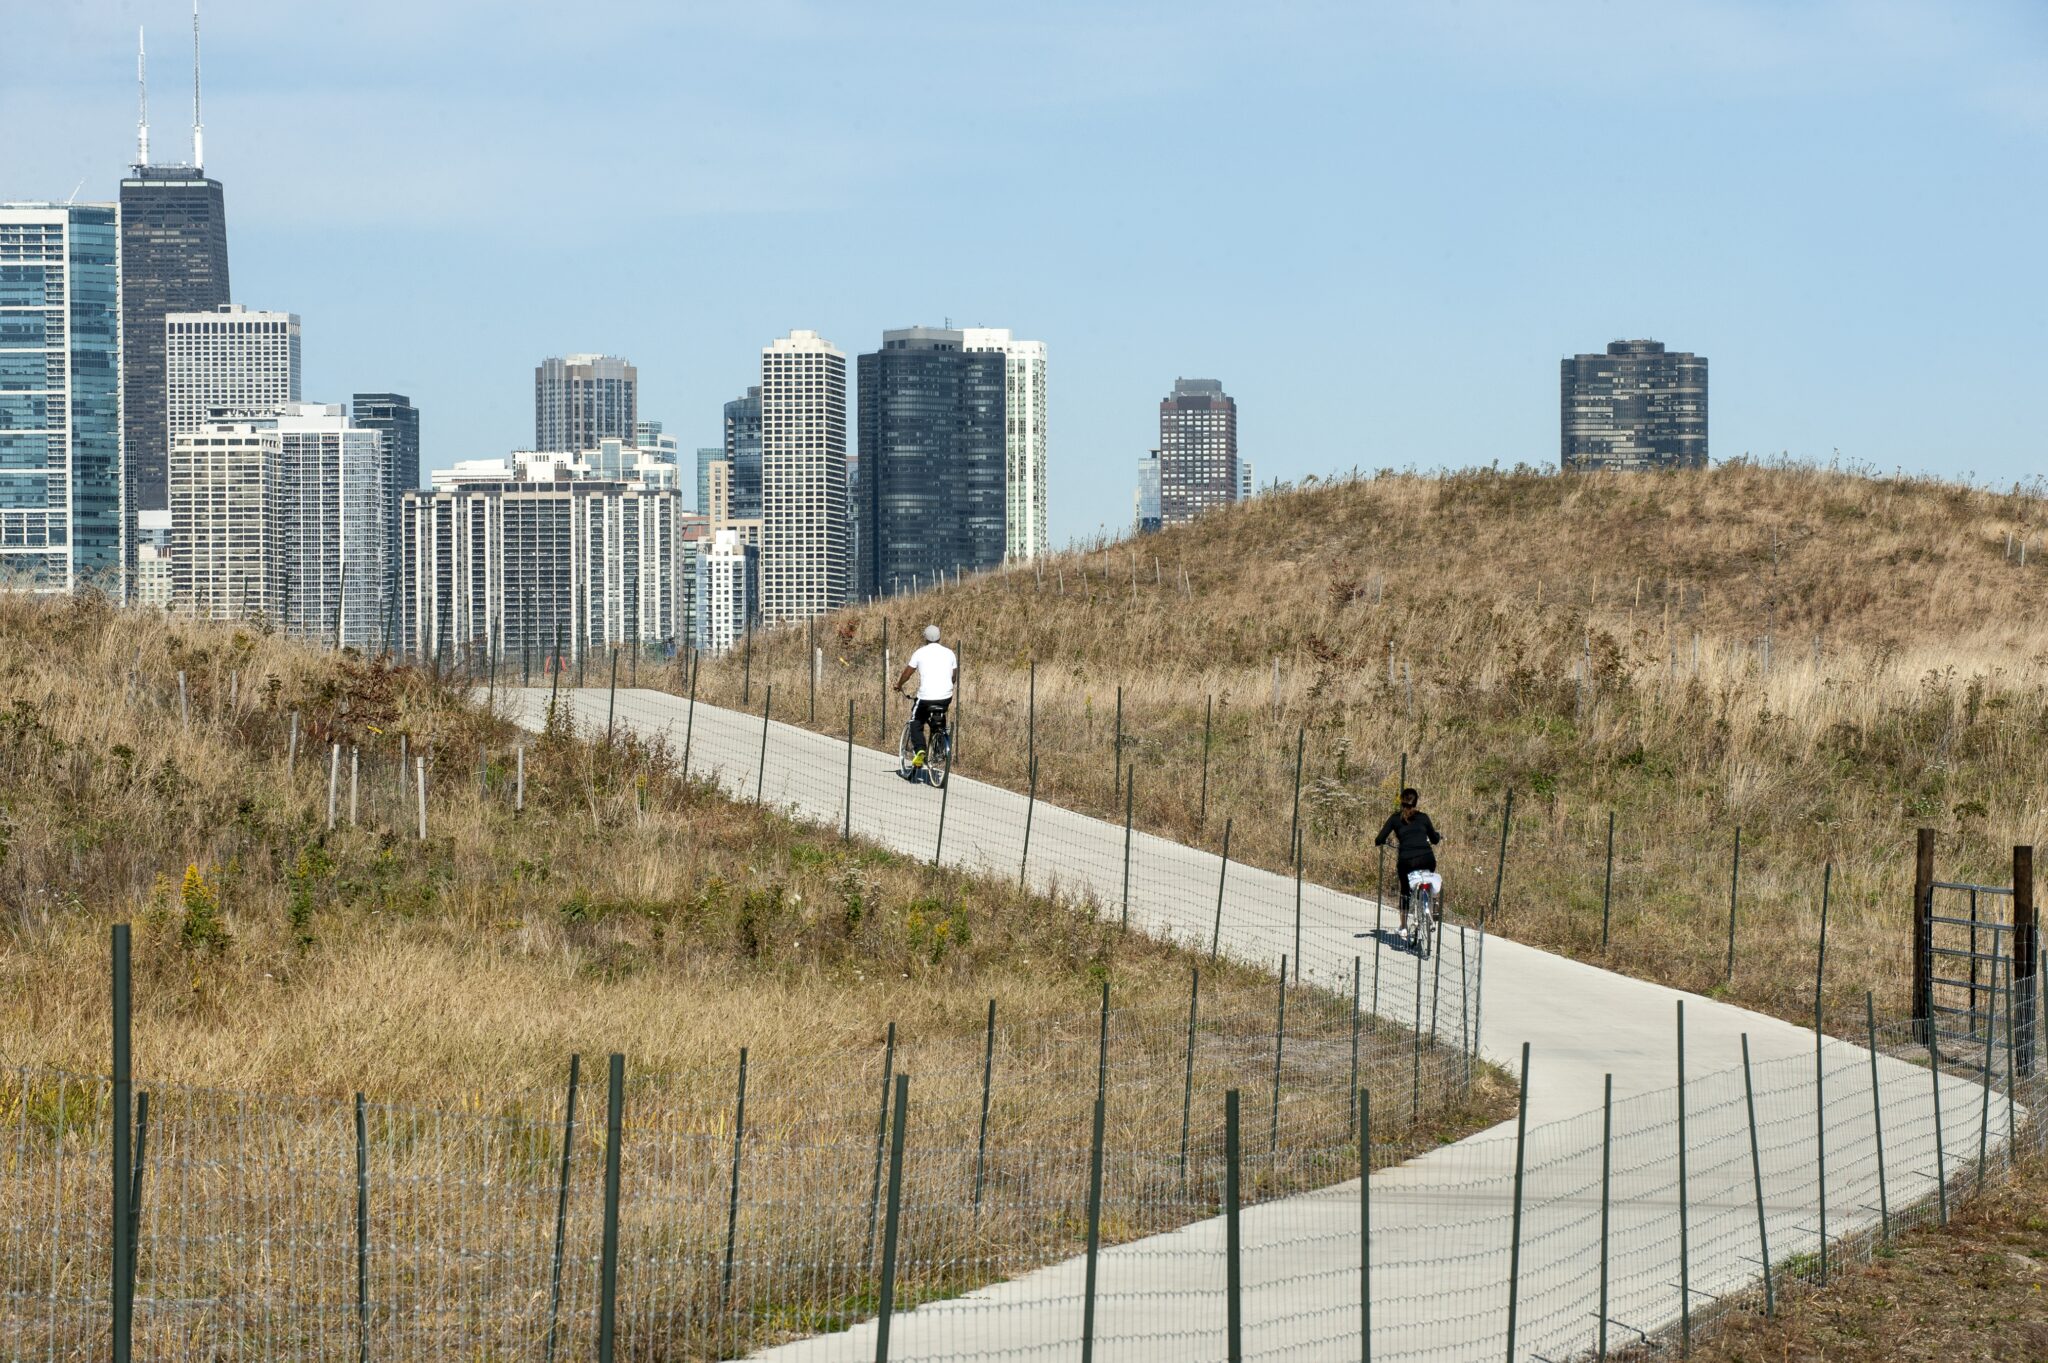 [ALL RIGHTS] Bike path in Northerly Island Park. © Laura Stoecker Photography LTD